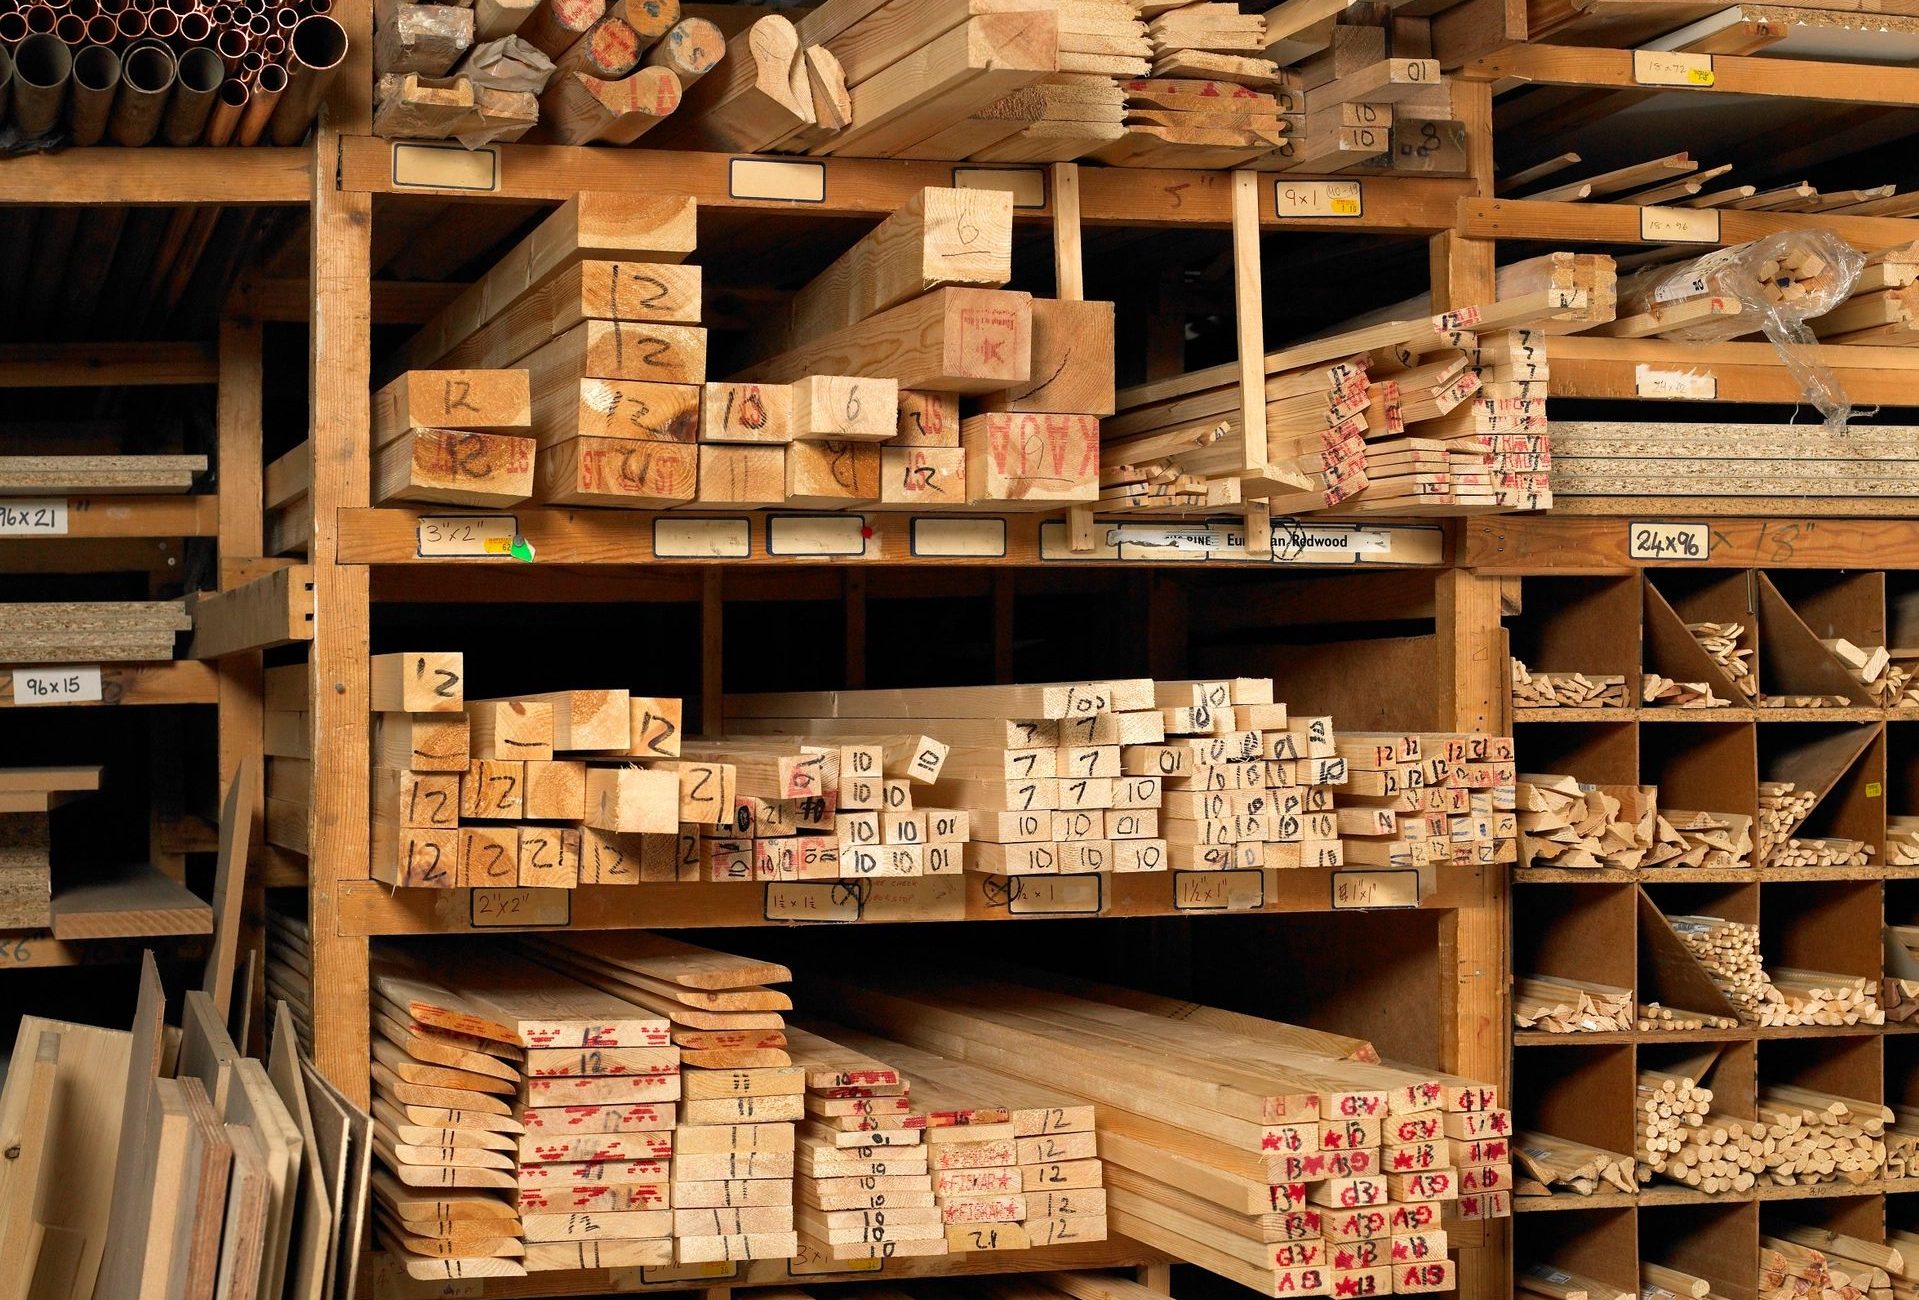 We stock or can obtain nearly any species of wood for your project.